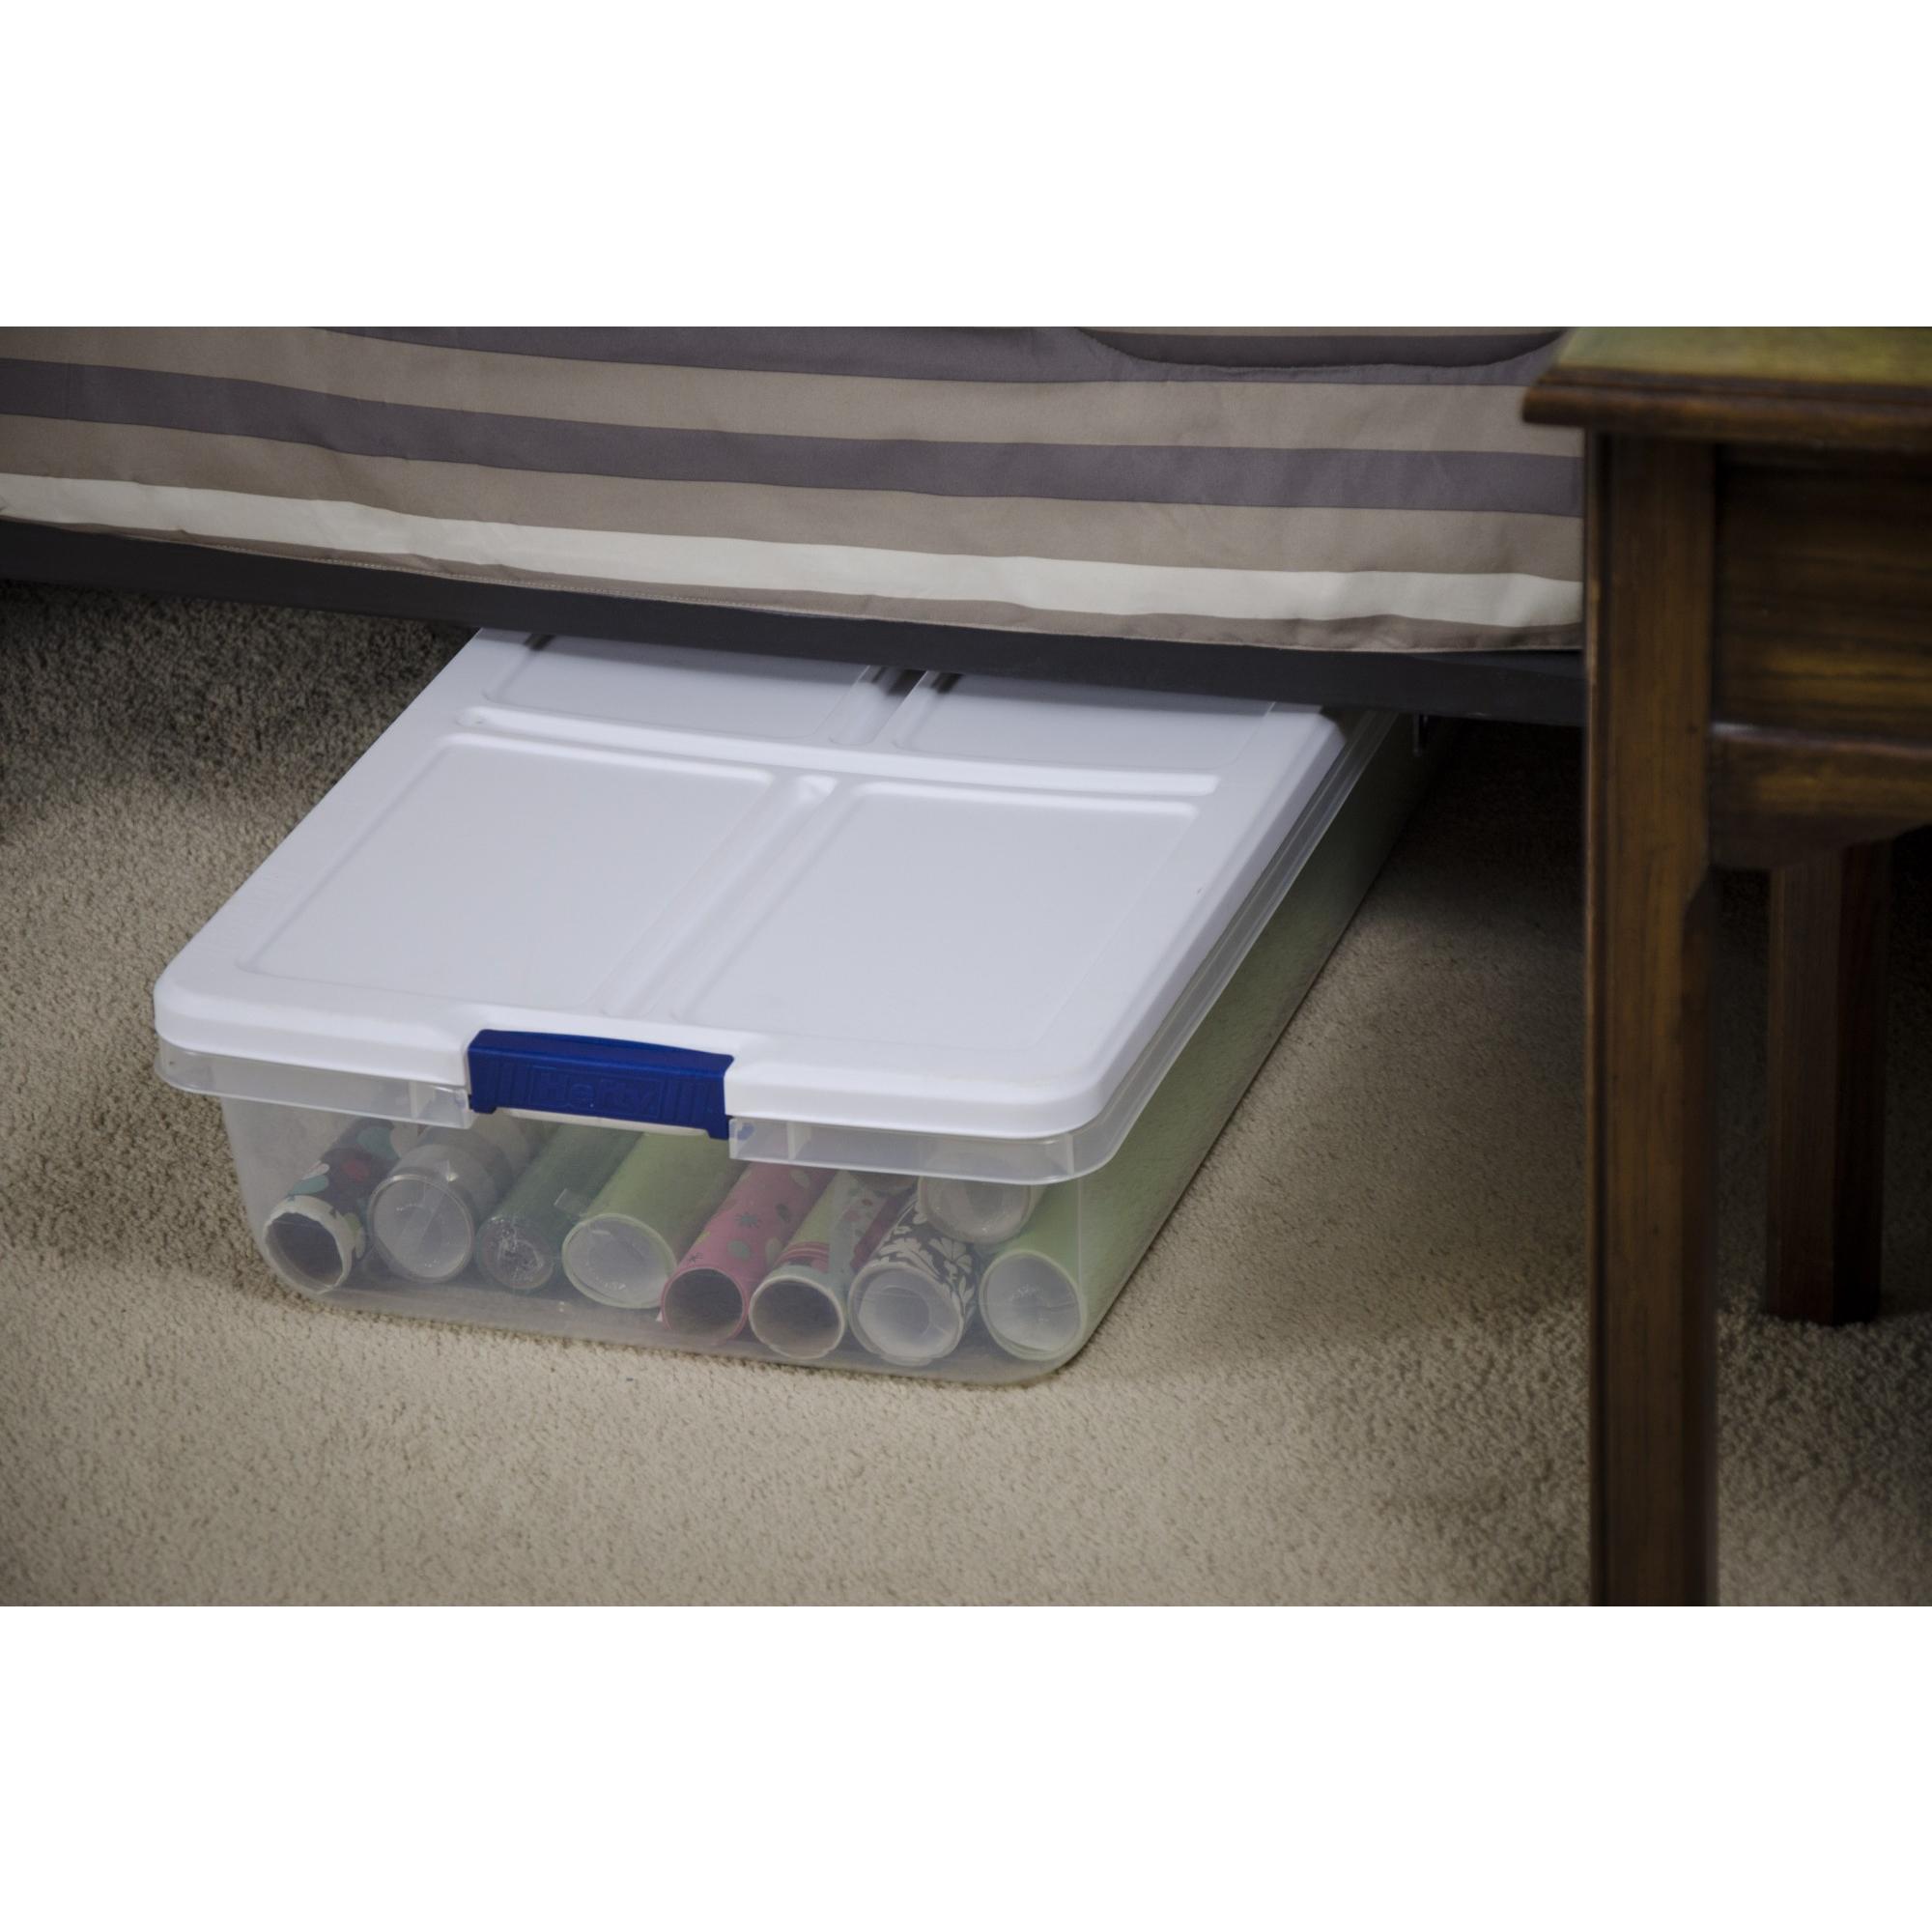 52-qt Hefty Latched Storage Bin, White Lid with Blue Handles - image 5 of 5